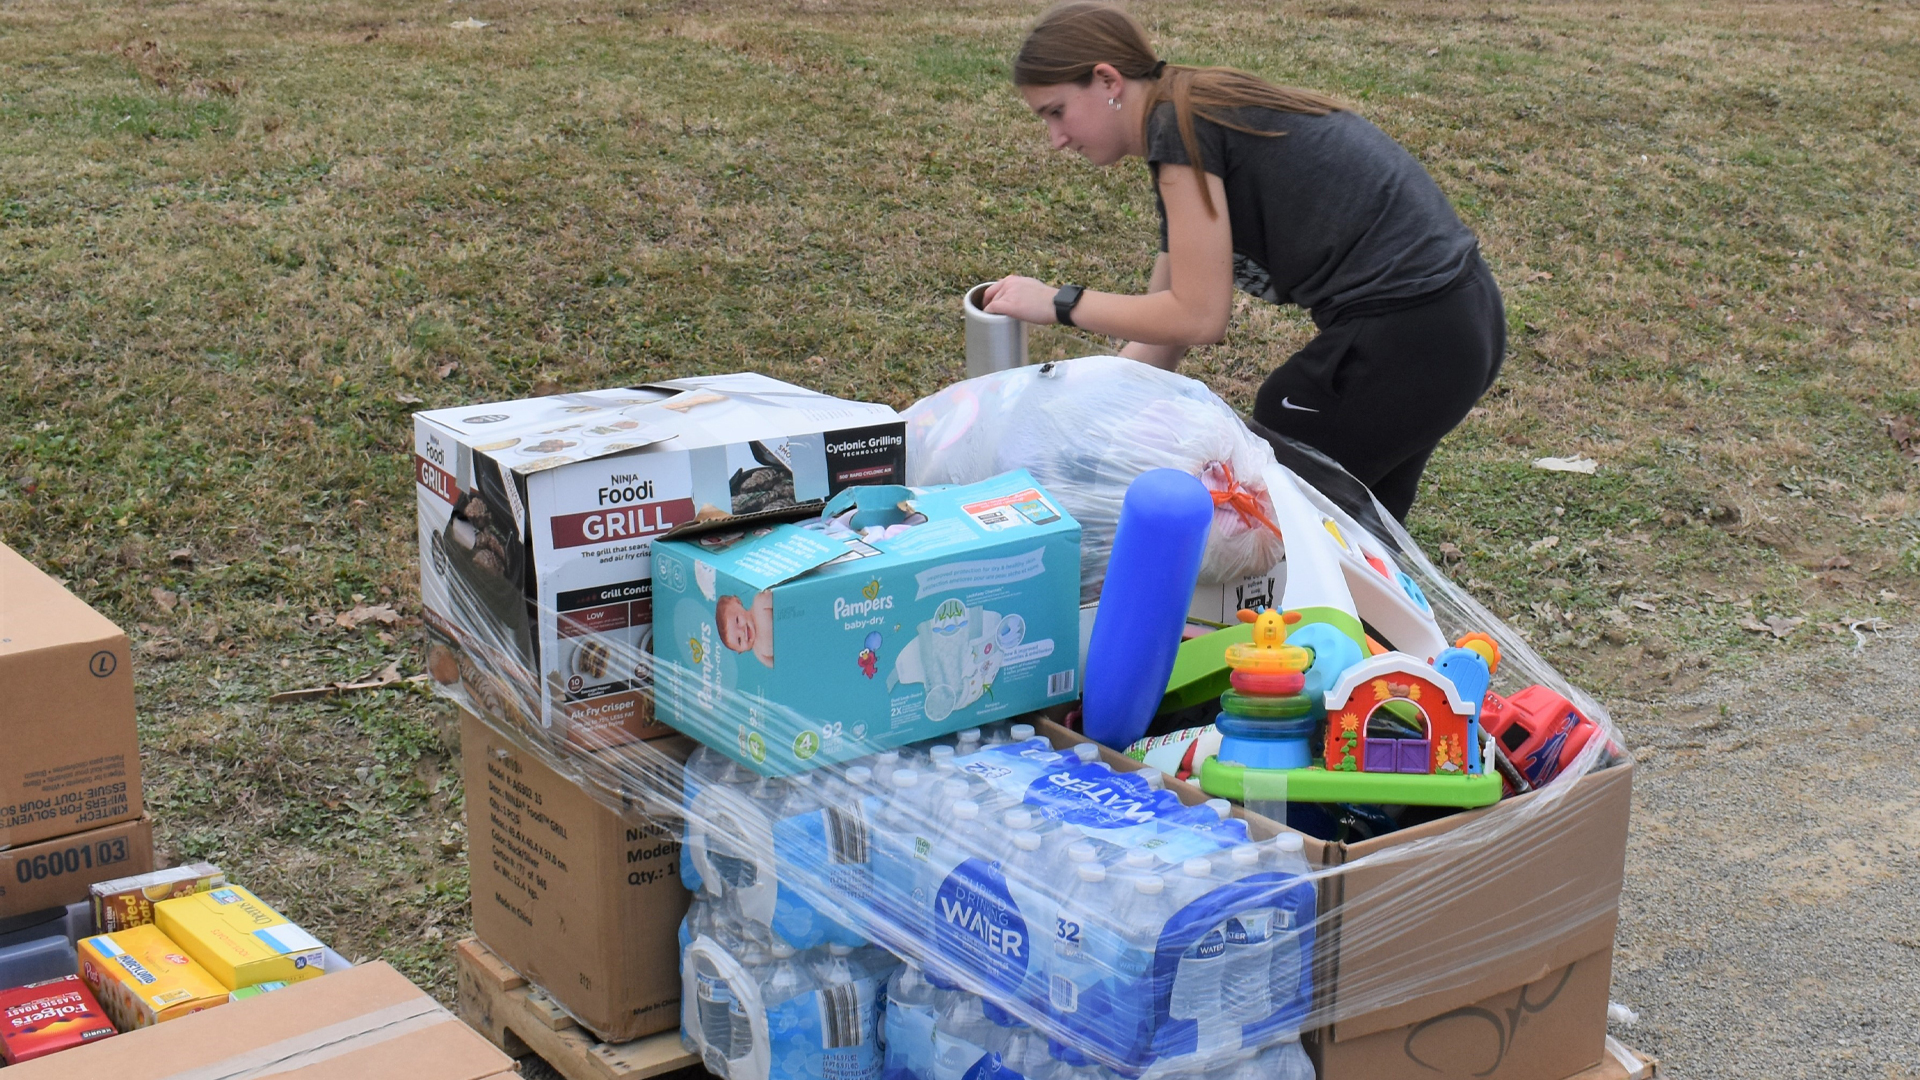 Charity-Items-for-Tornado-Victims